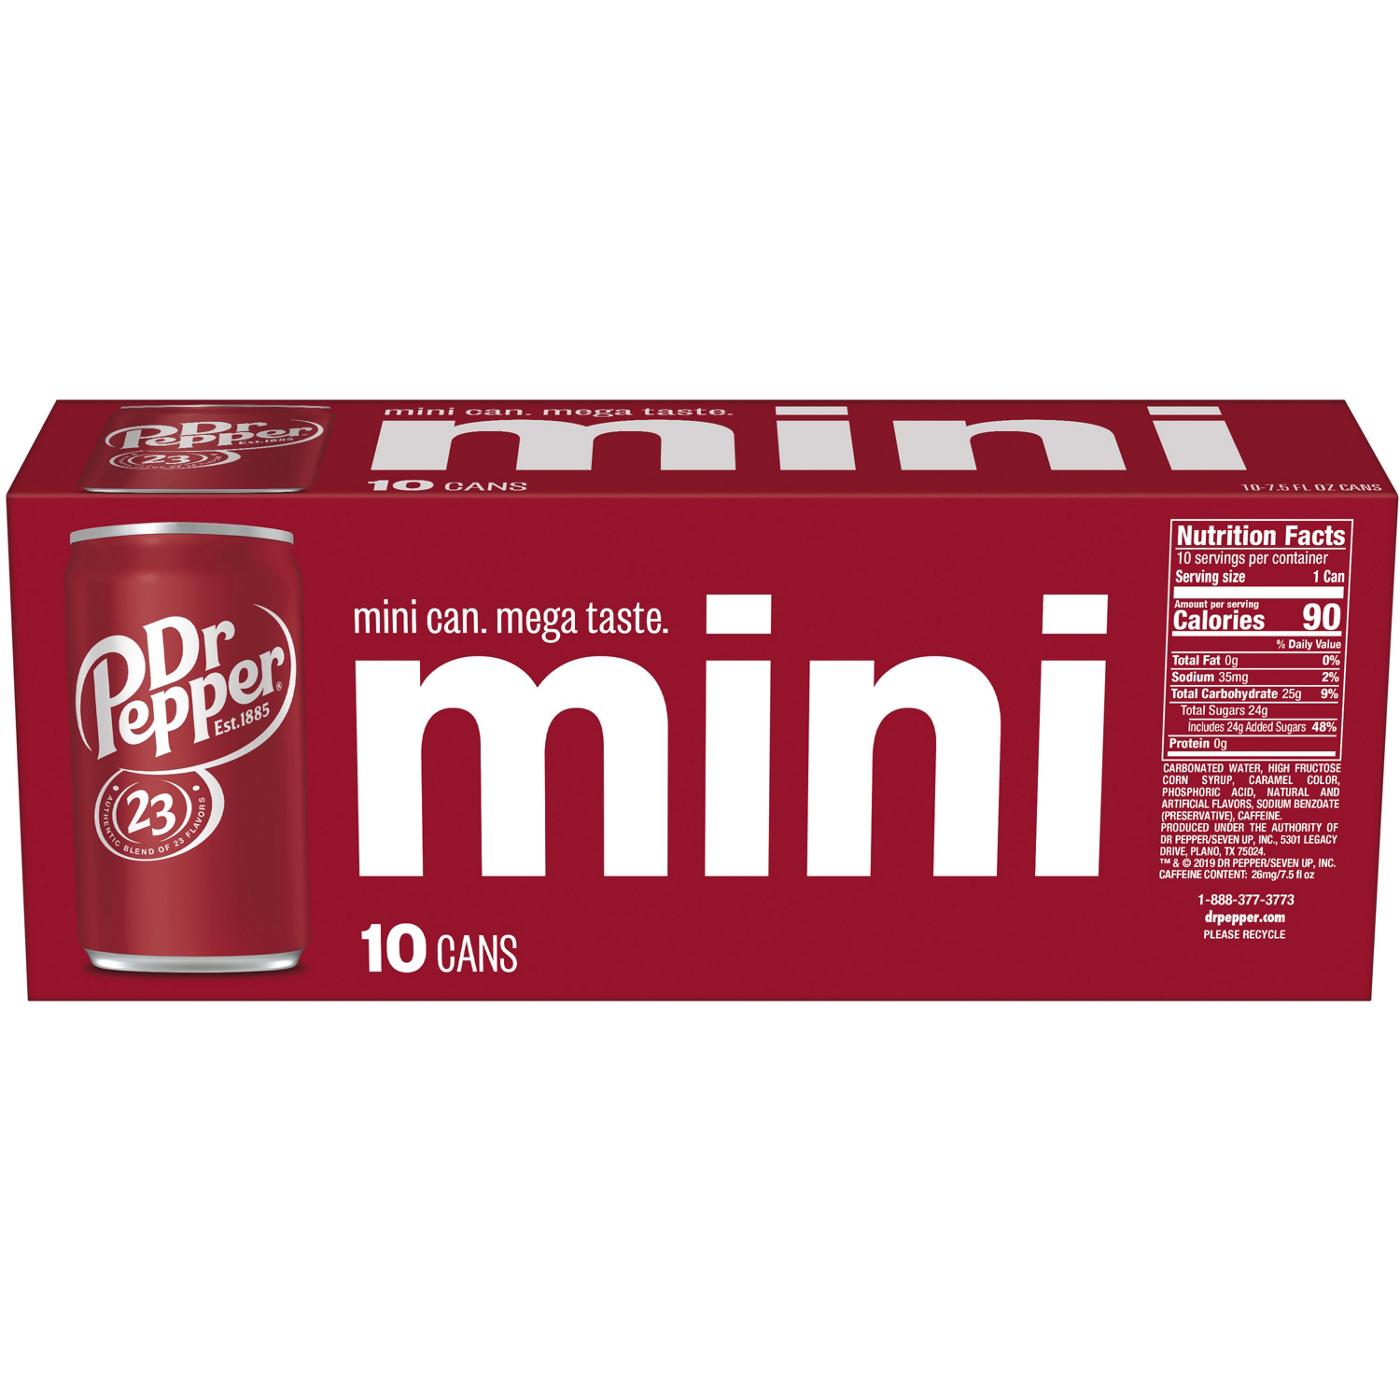 Dr Pepper Soda Mini 7.5 oz Cans; image 6 of 7